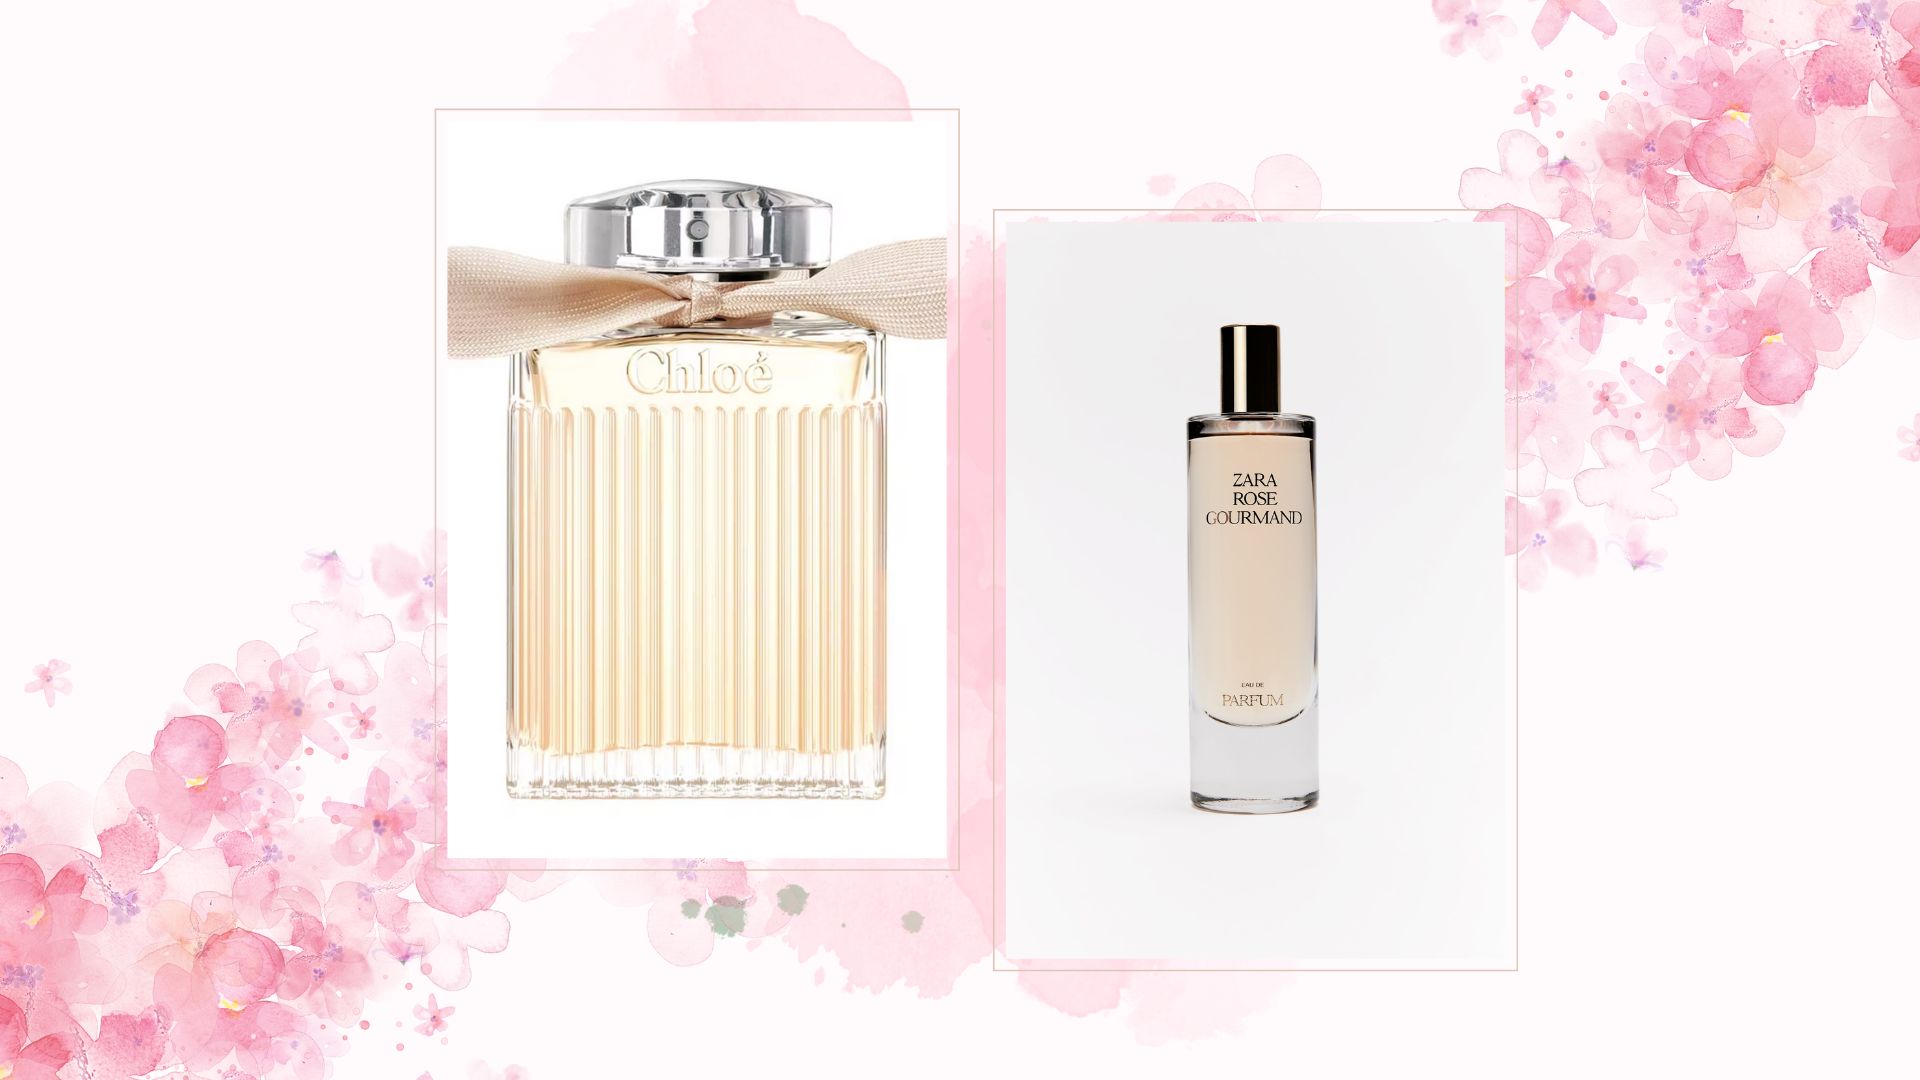 We've found the perfect dupe of the Chloé Signature perfume from Zara